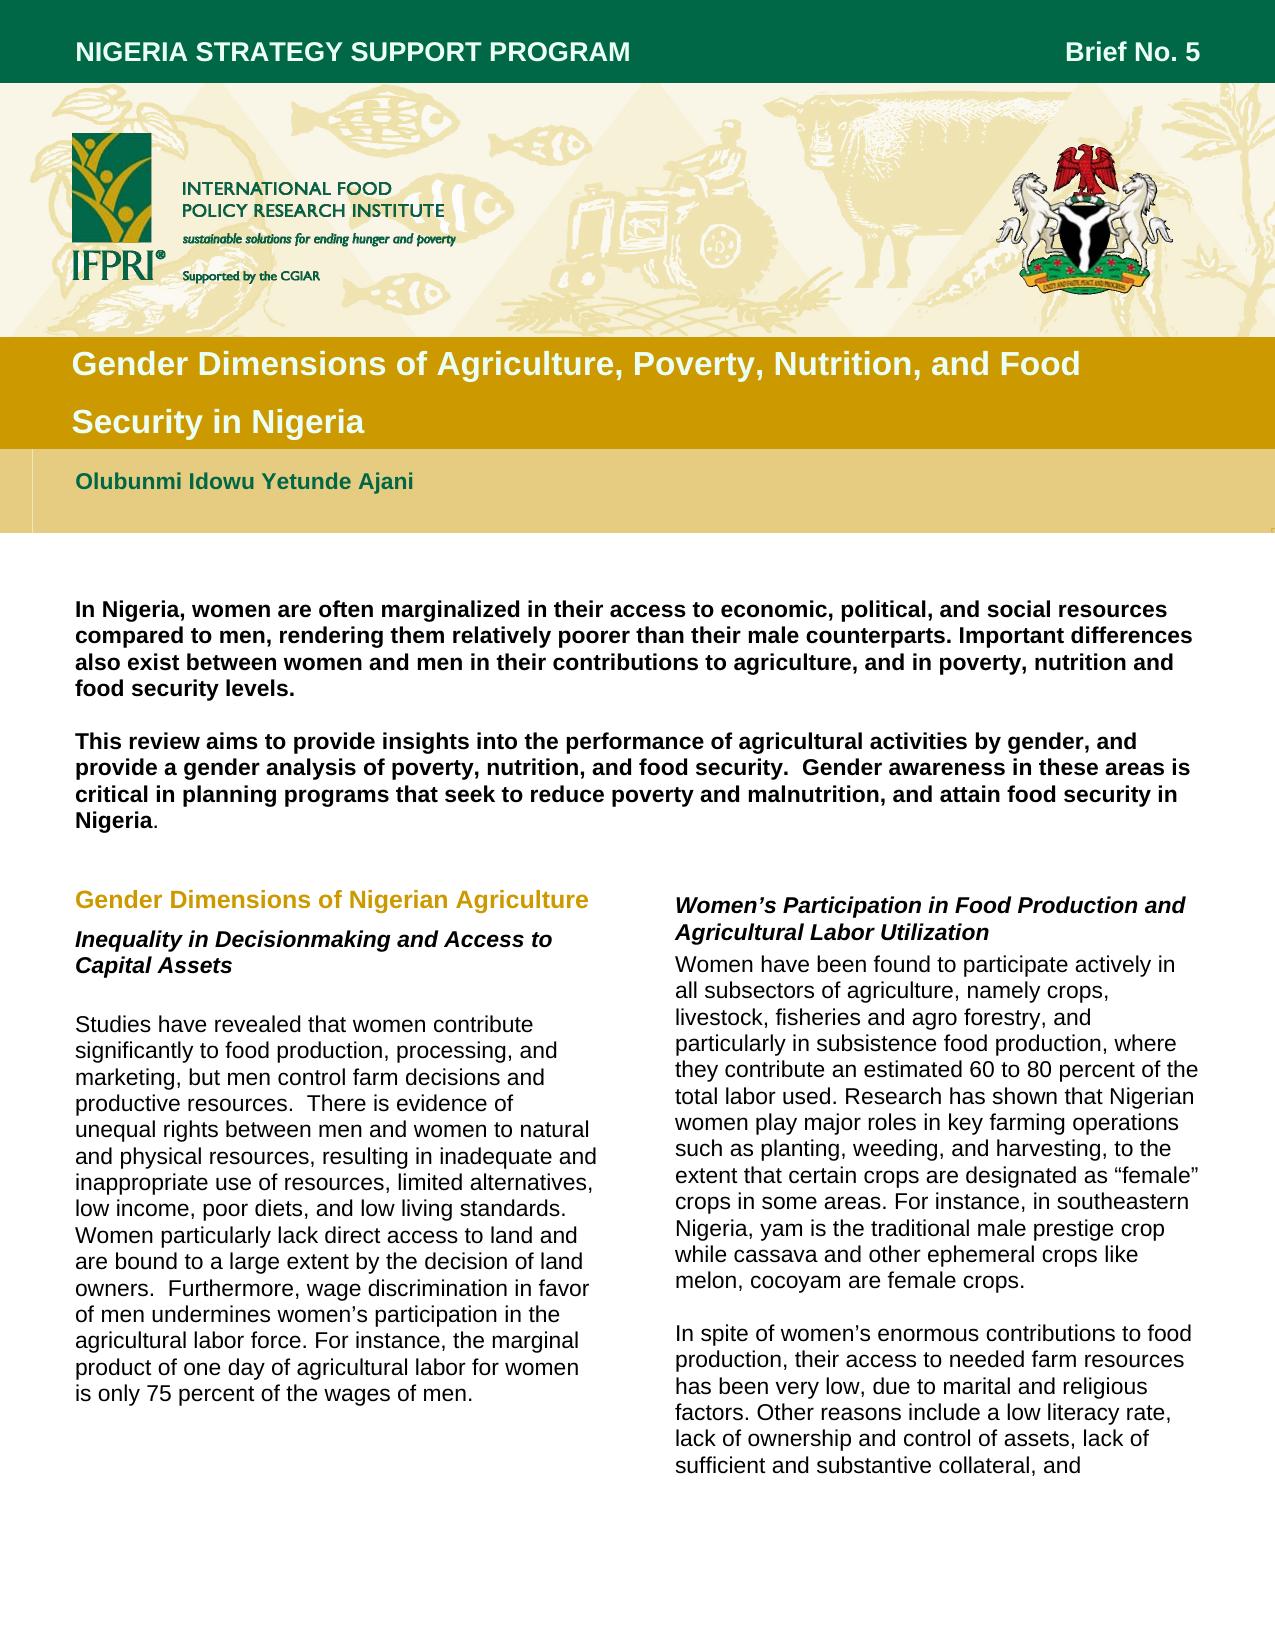 Gender Dimensions of Agriculture, Poverty, Nutrition, and Food Security in Nigeria